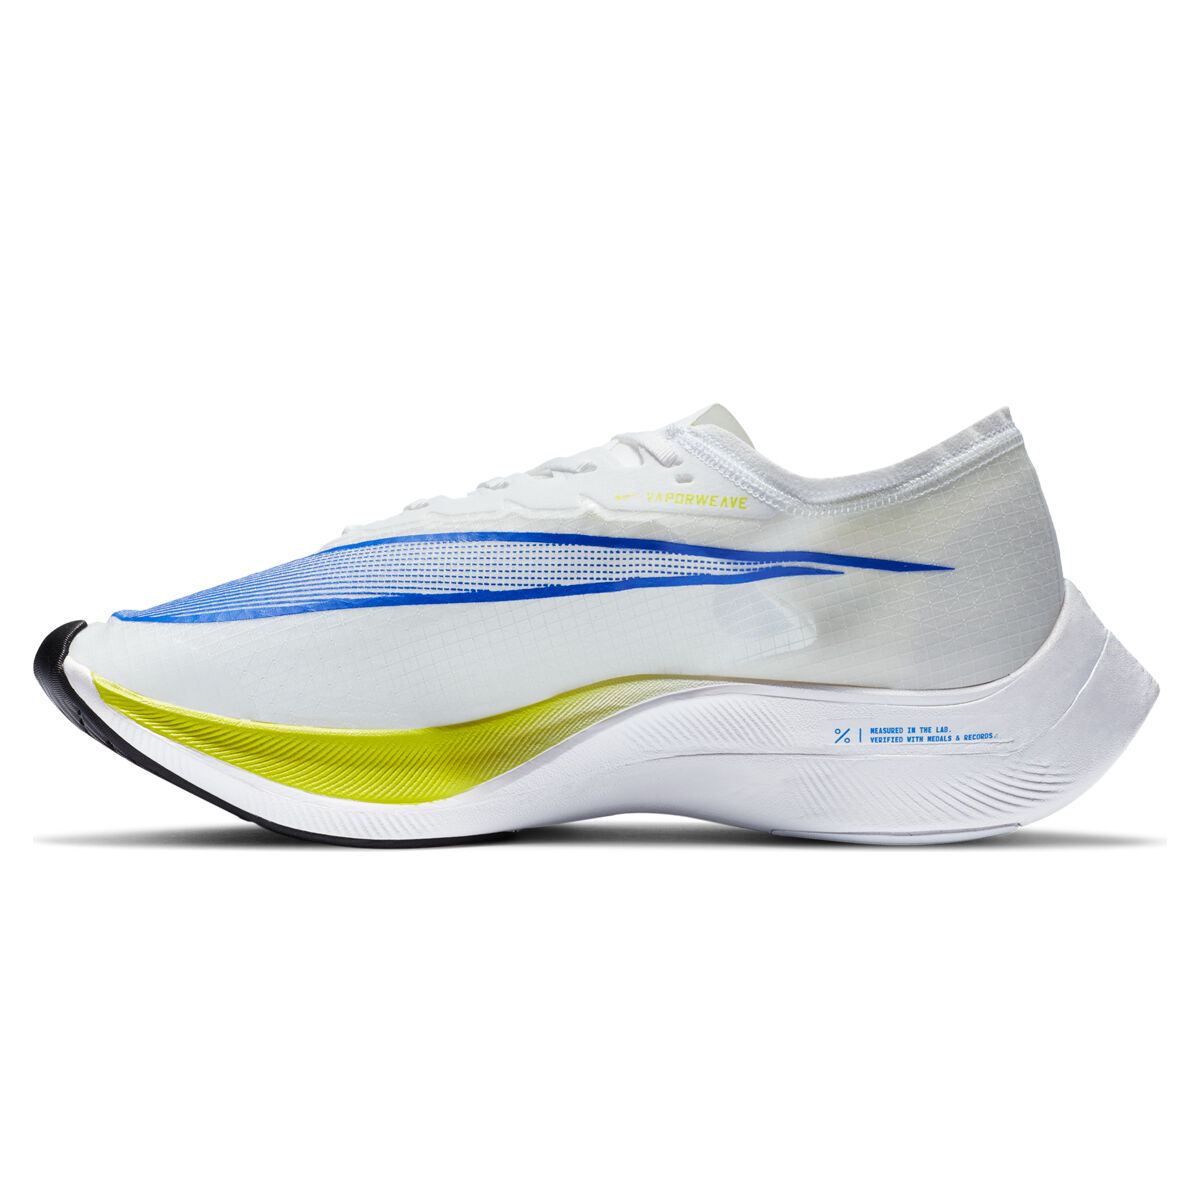 Nike Air ZoomX Vaporfly Next% Mens 